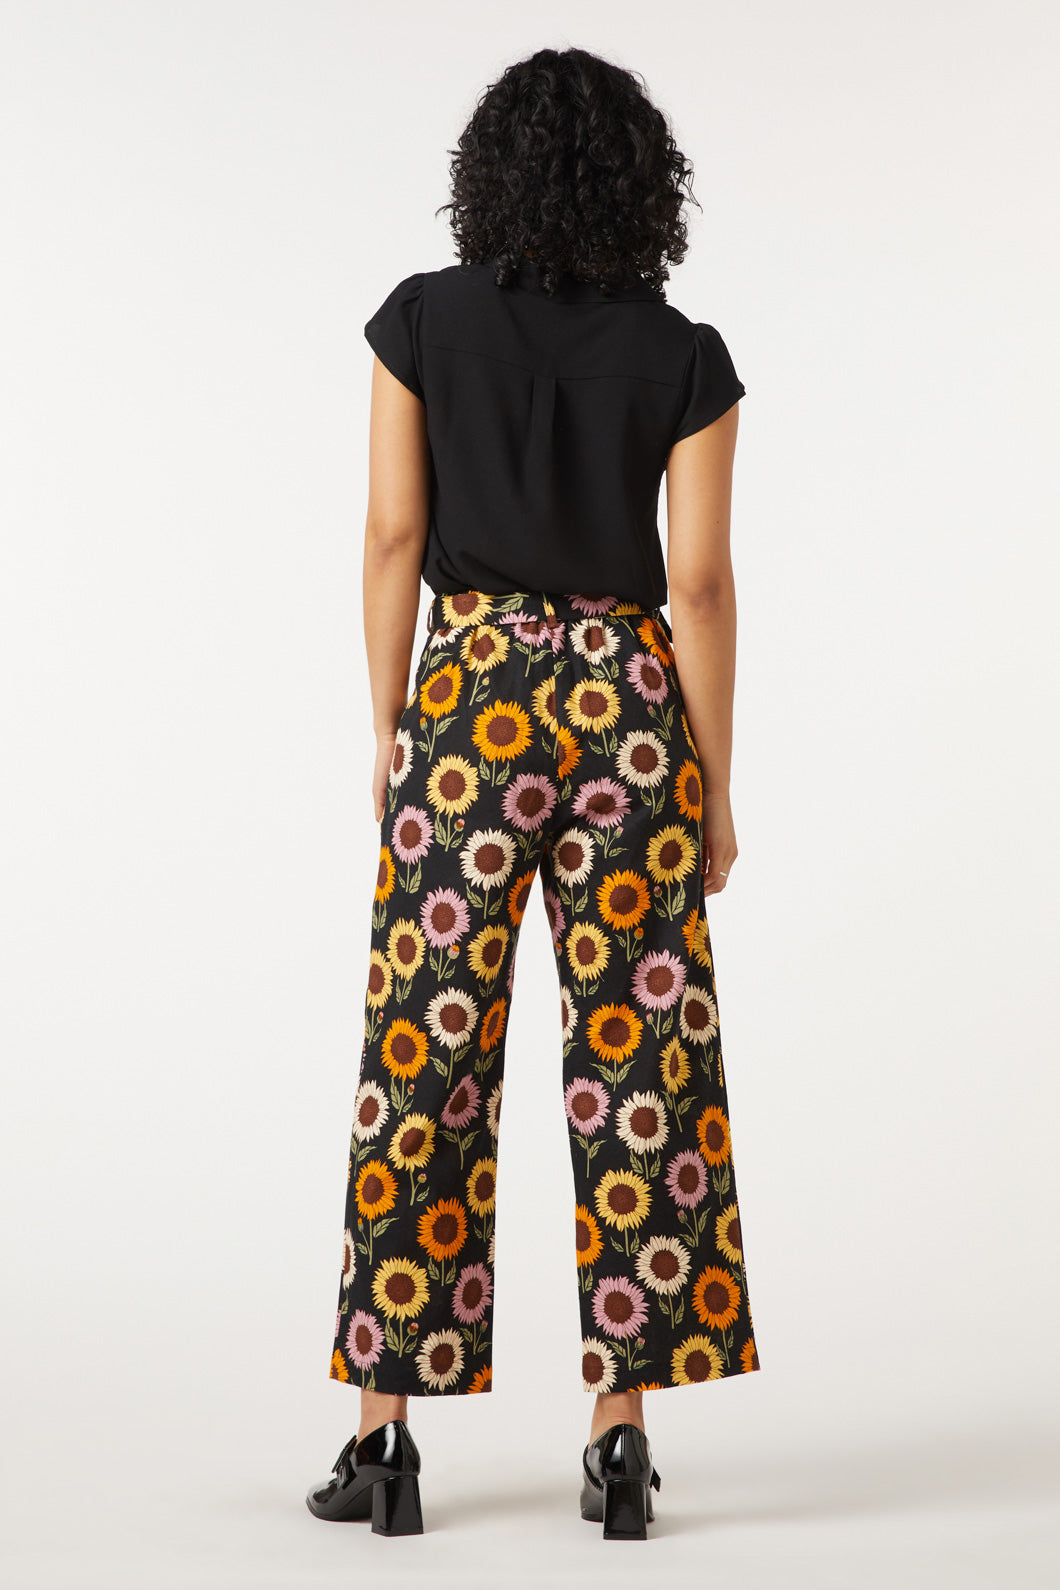 Buy Tandul Womens Trousers Multicolour Stretchy Trousers with Unique  Sunflower Design Full Length Trousers with Elastic  Strip Waist Boost  Your Style with Casual Trousers for Women  Girls XLarge Size at